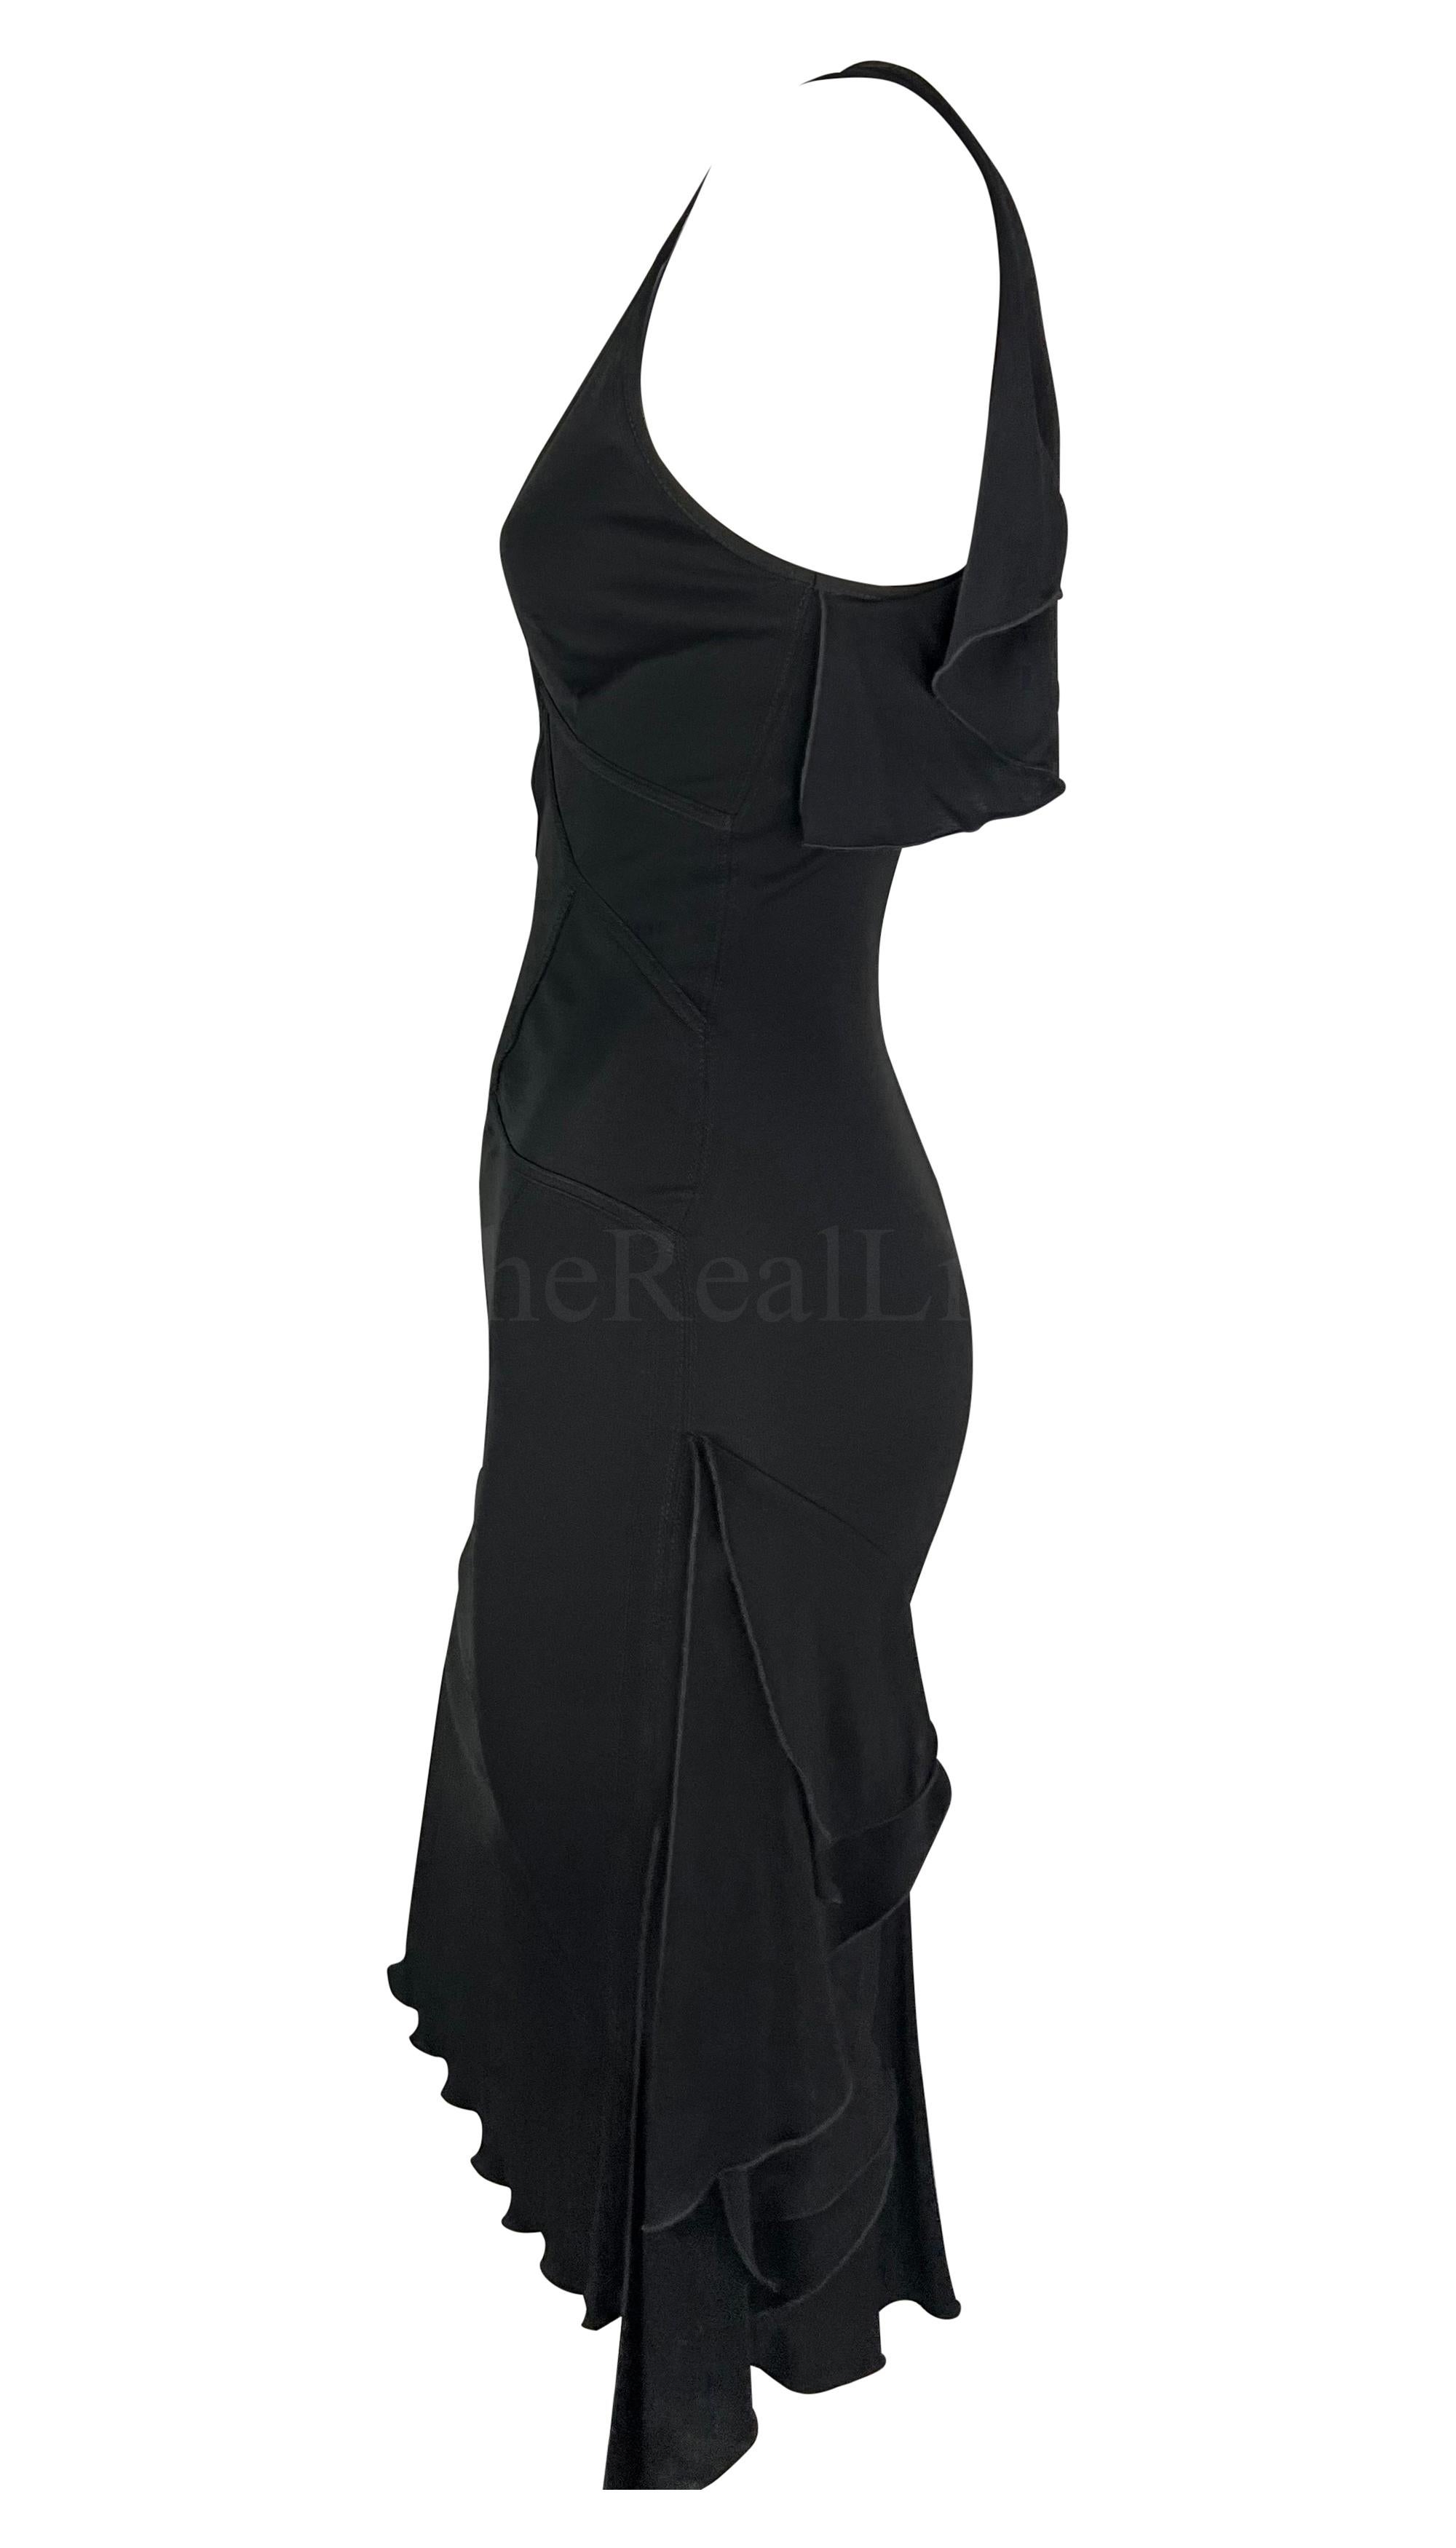 2003 Gucci by Tom Ford Black Plunge Ruffle Dress Sleeveless In Excellent Condition For Sale In West Hollywood, CA